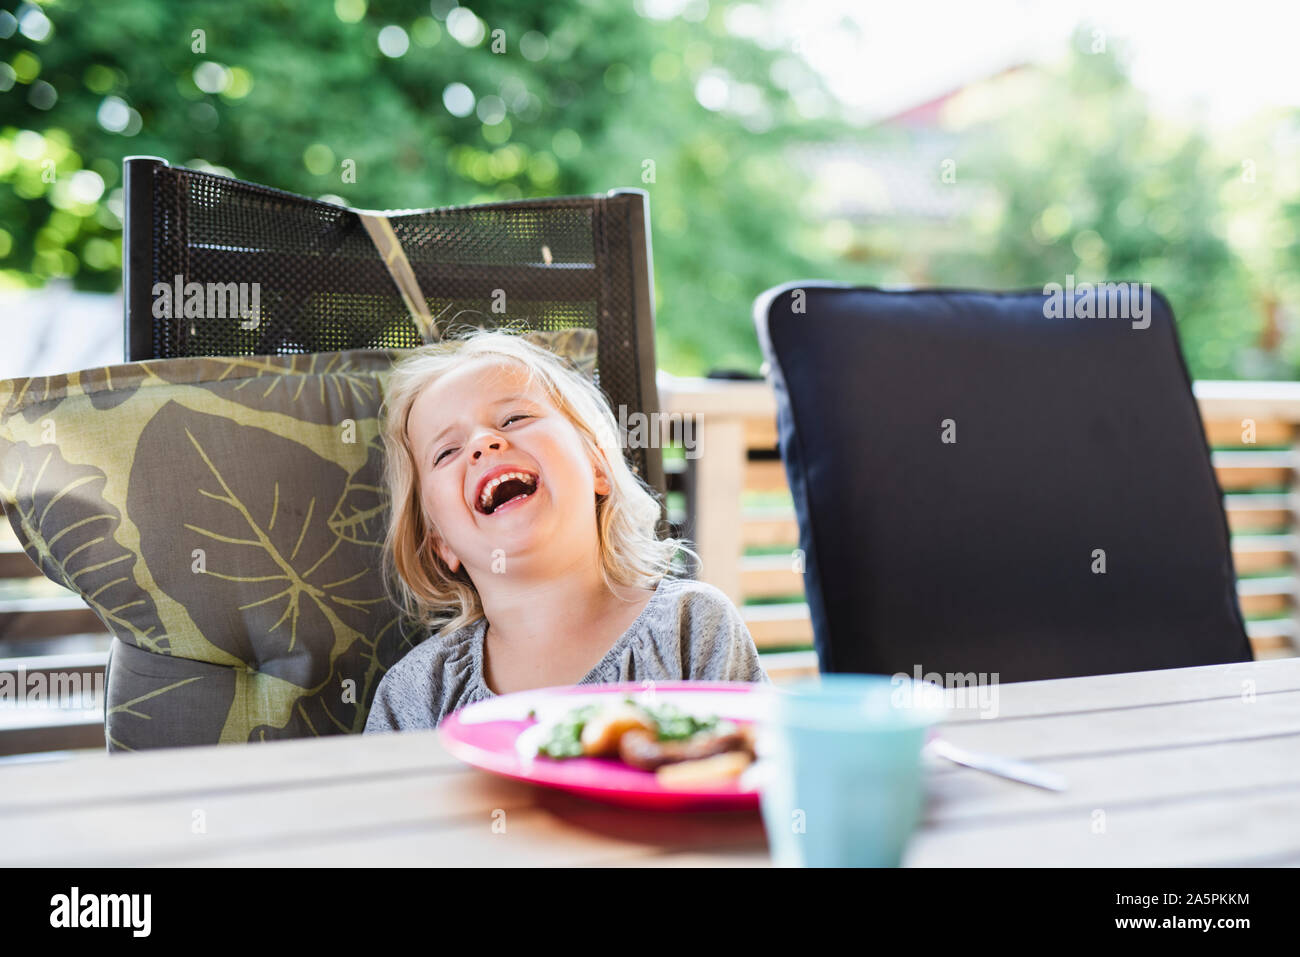 Laughing girl at table Stock Photo